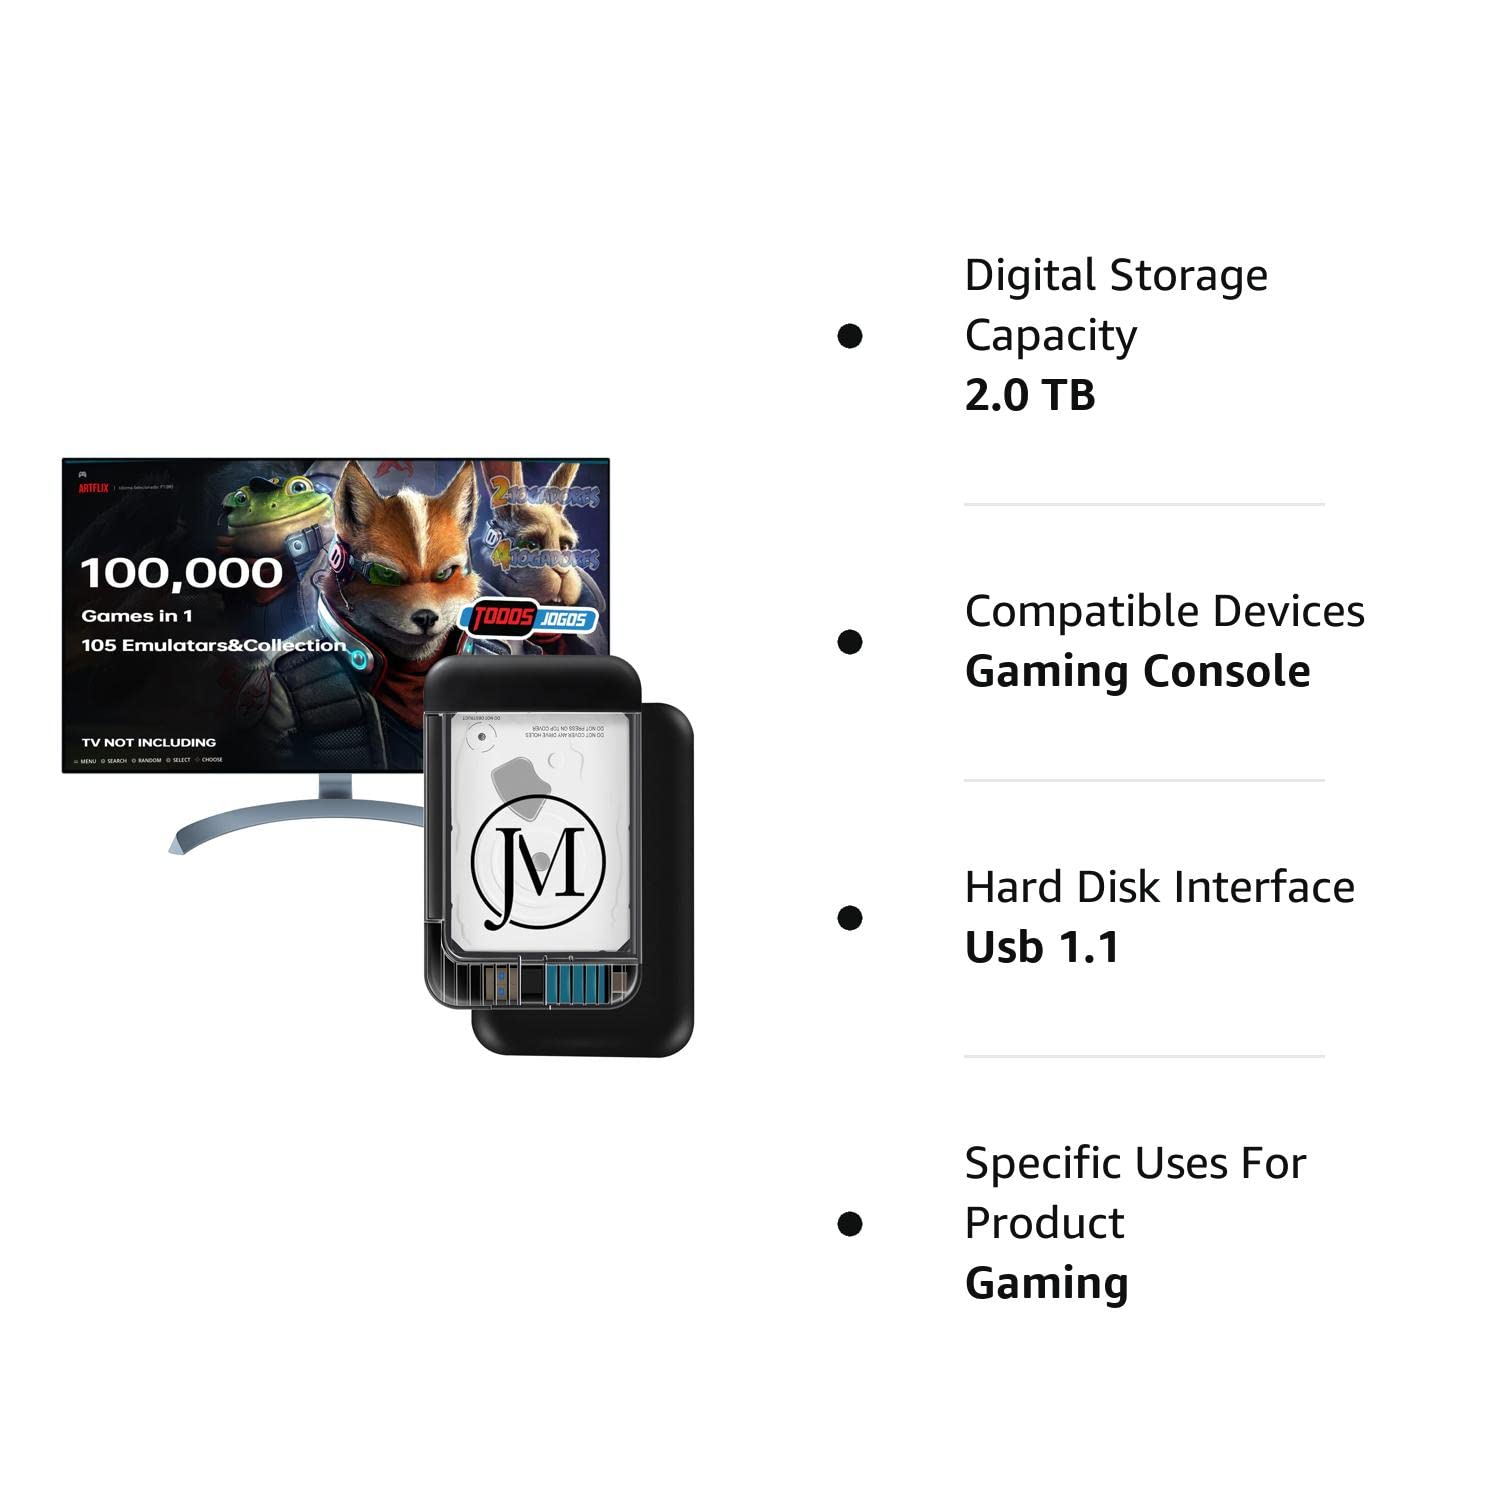 2TB Retro Game Console for Windows, External Hard Drive Built-in 100,000 Games, Video Game Consoles, HDD USB 3.0, Game Drive Compatible with Mame/Atari/SNES/Sega/PS1, Pre-installed 105 Emulators